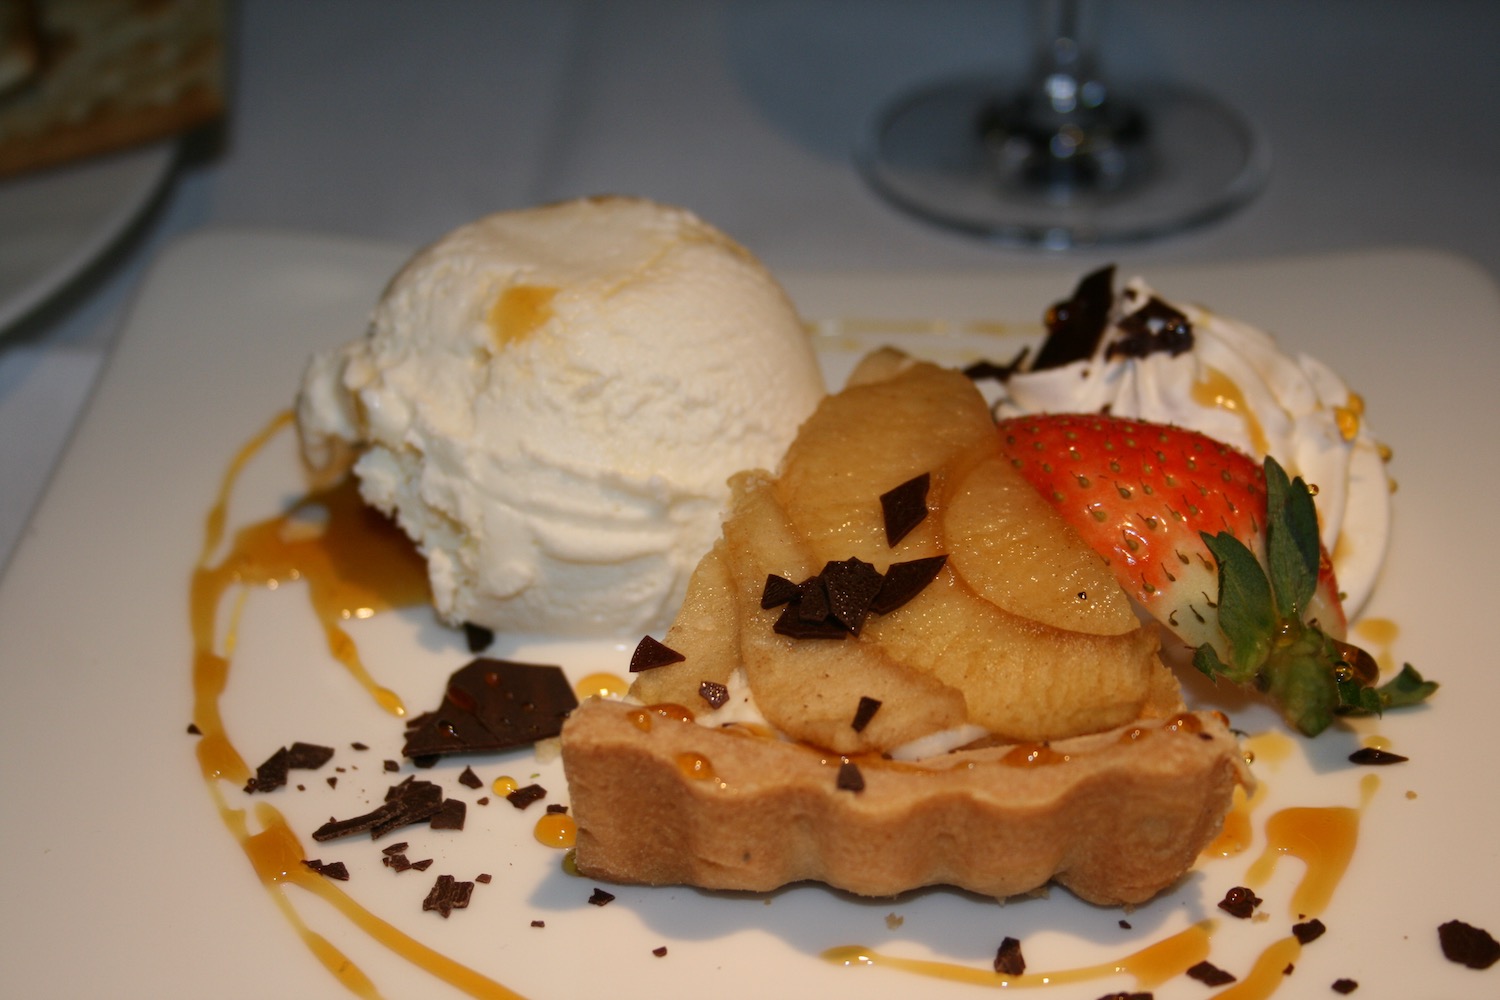 a plate of dessert with ice cream and fruit